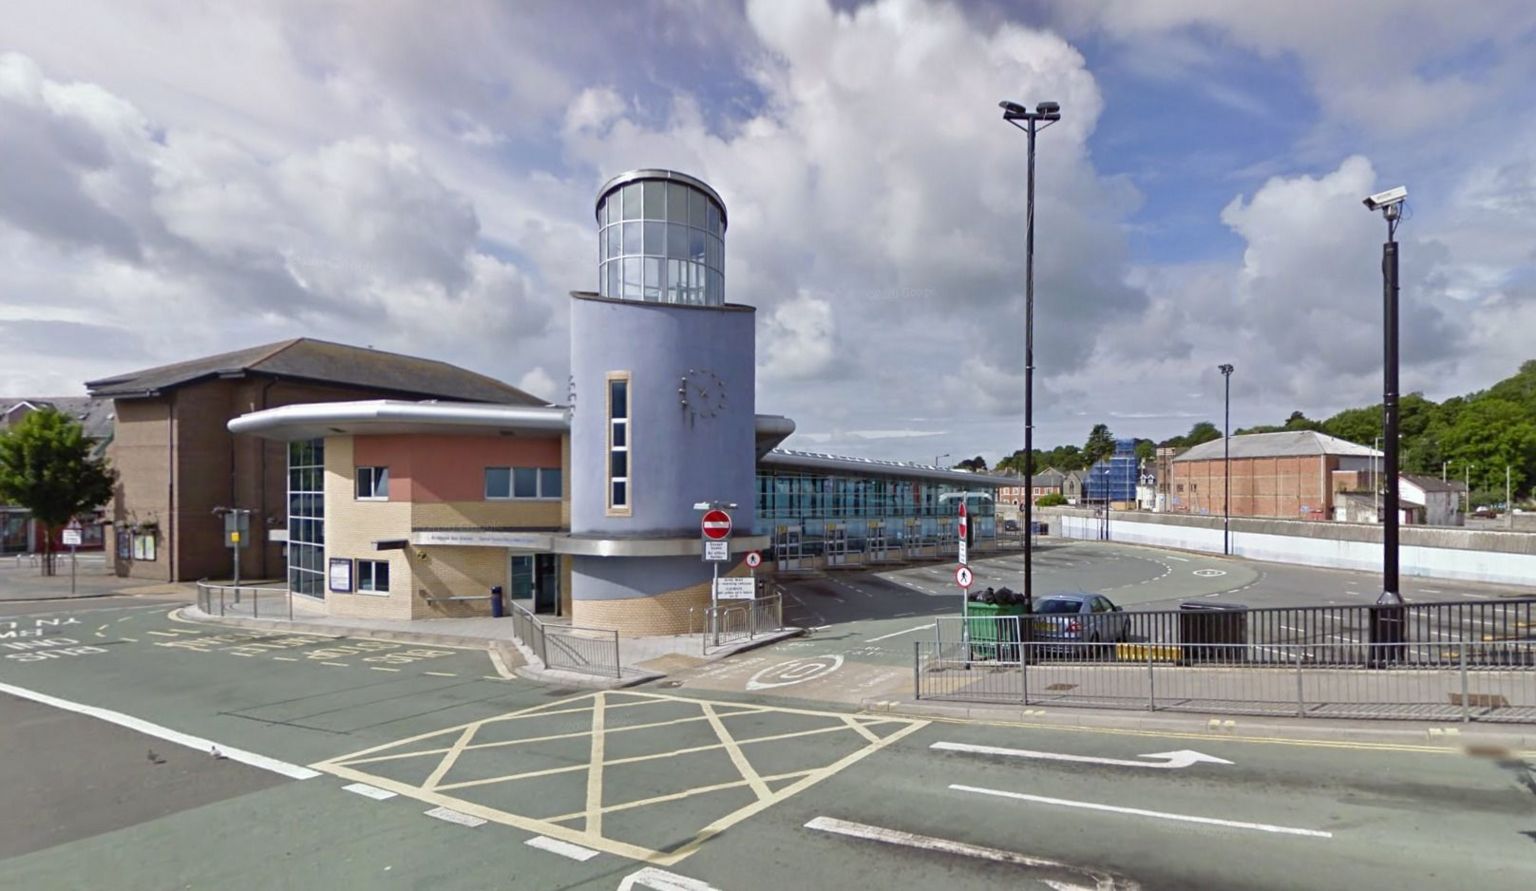 Bridgend bus station could be closed because of budget cuts